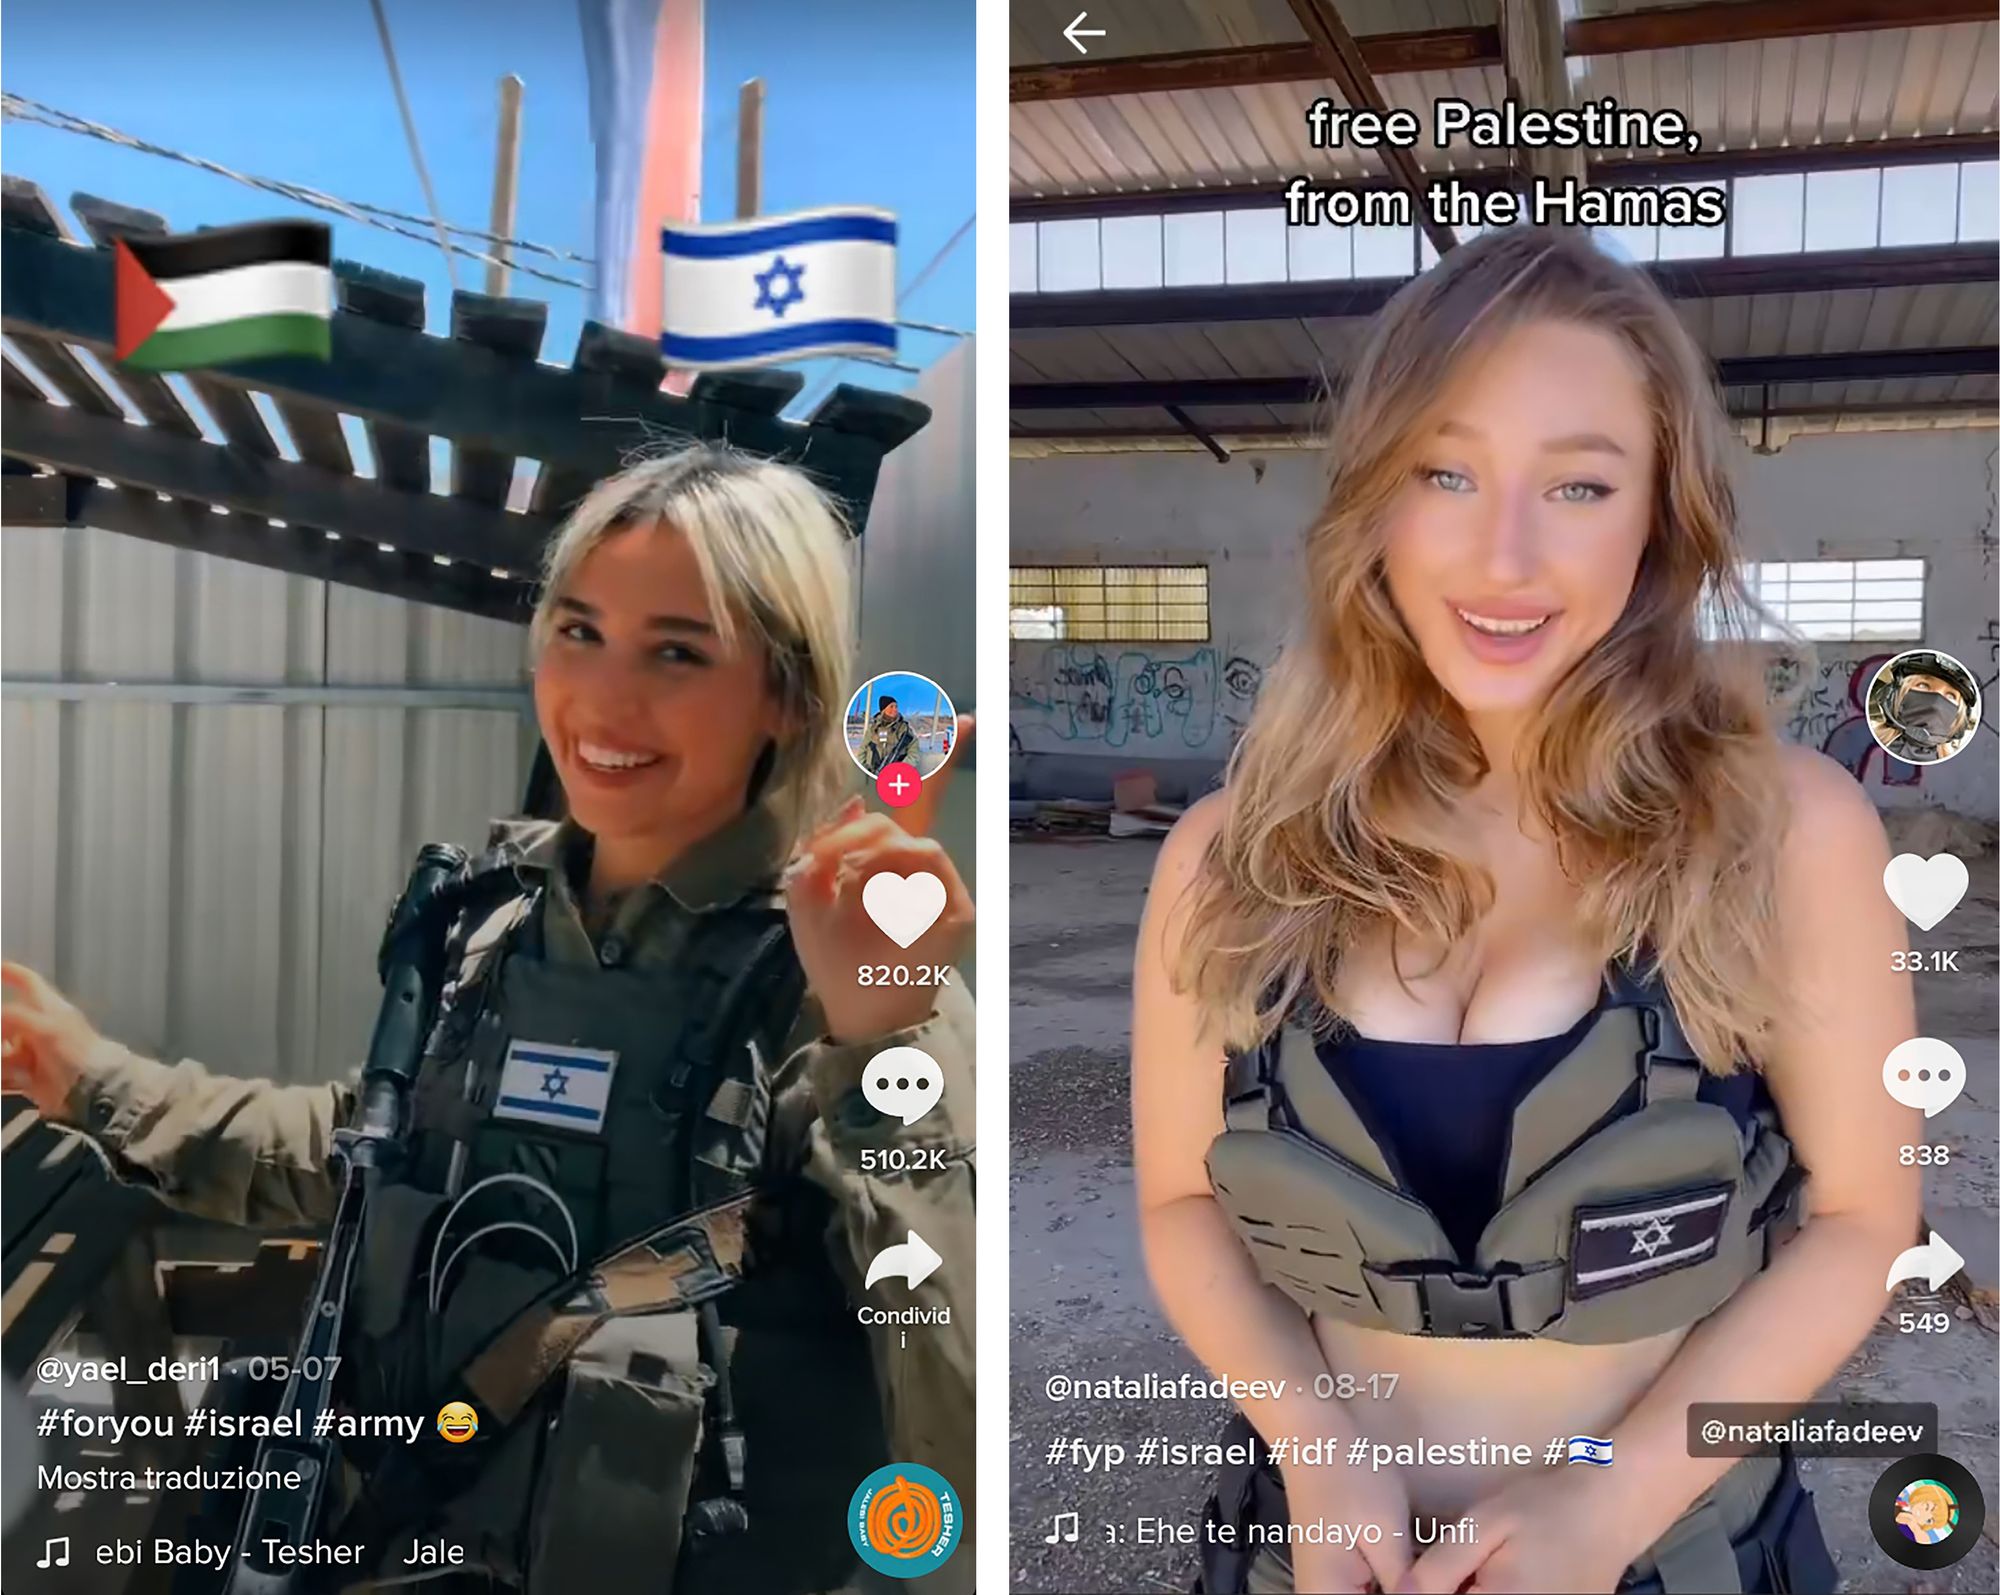 image6.jpgTwo TikTok screenshots of pretty girls in Israeli army garment. In the first image, the Palestinian and Israeli flag emojis hover over the dancing girl. In the second image, the words "free Palestine from the Hamas" are typed on top of the lightly dressed woman. 